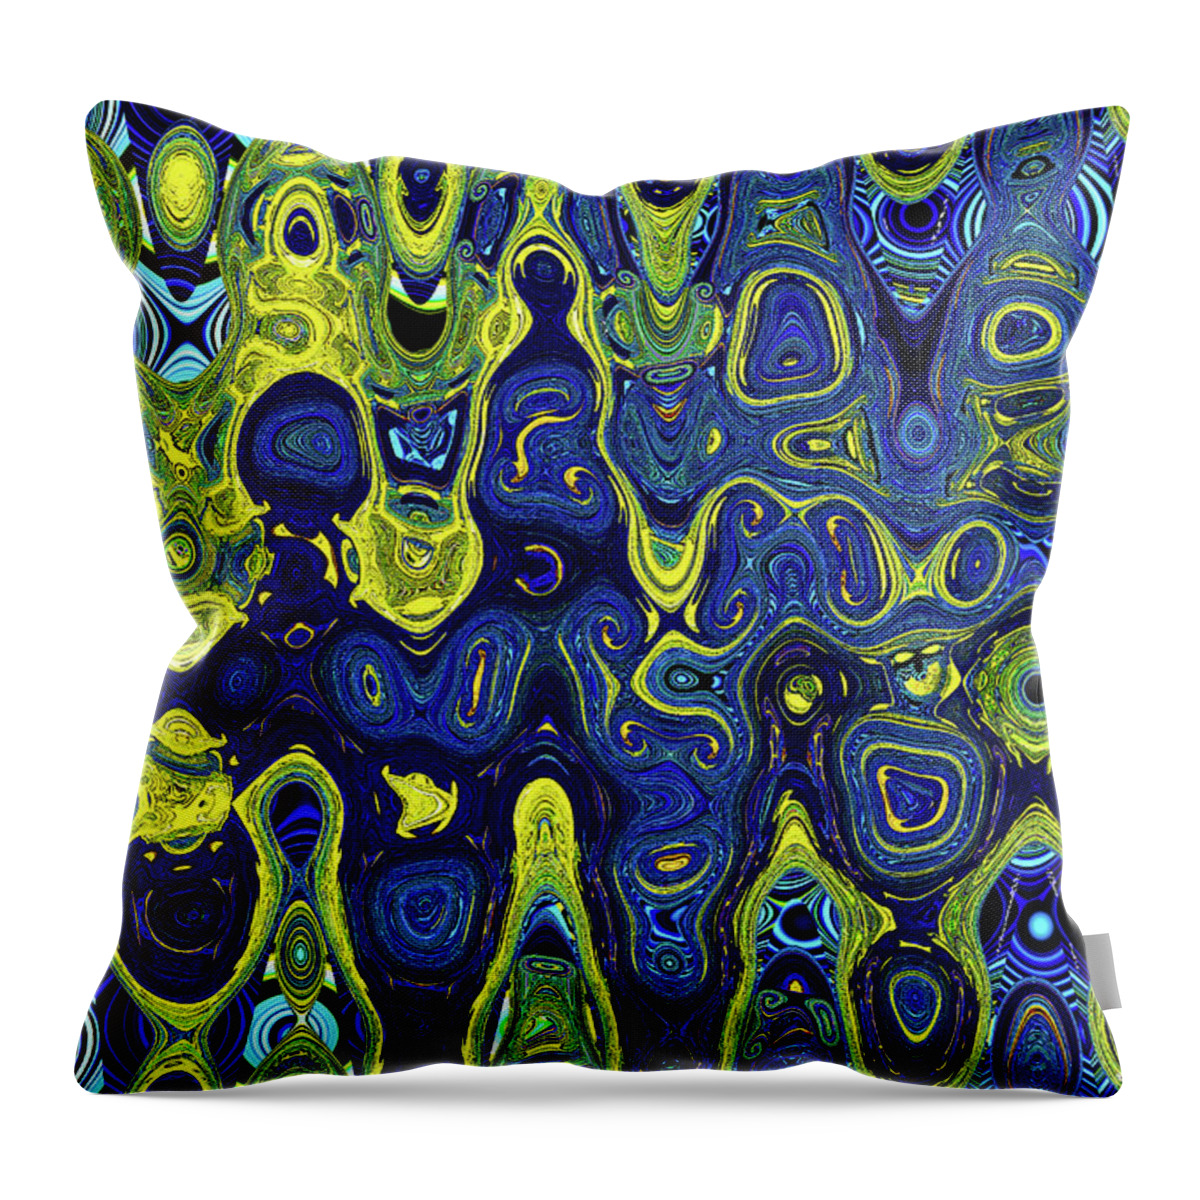 Aloe Vera Slices Abstract Panel Throw Pillow featuring the digital art Aloe Vera Slices Abstract Panel by Tom Janca